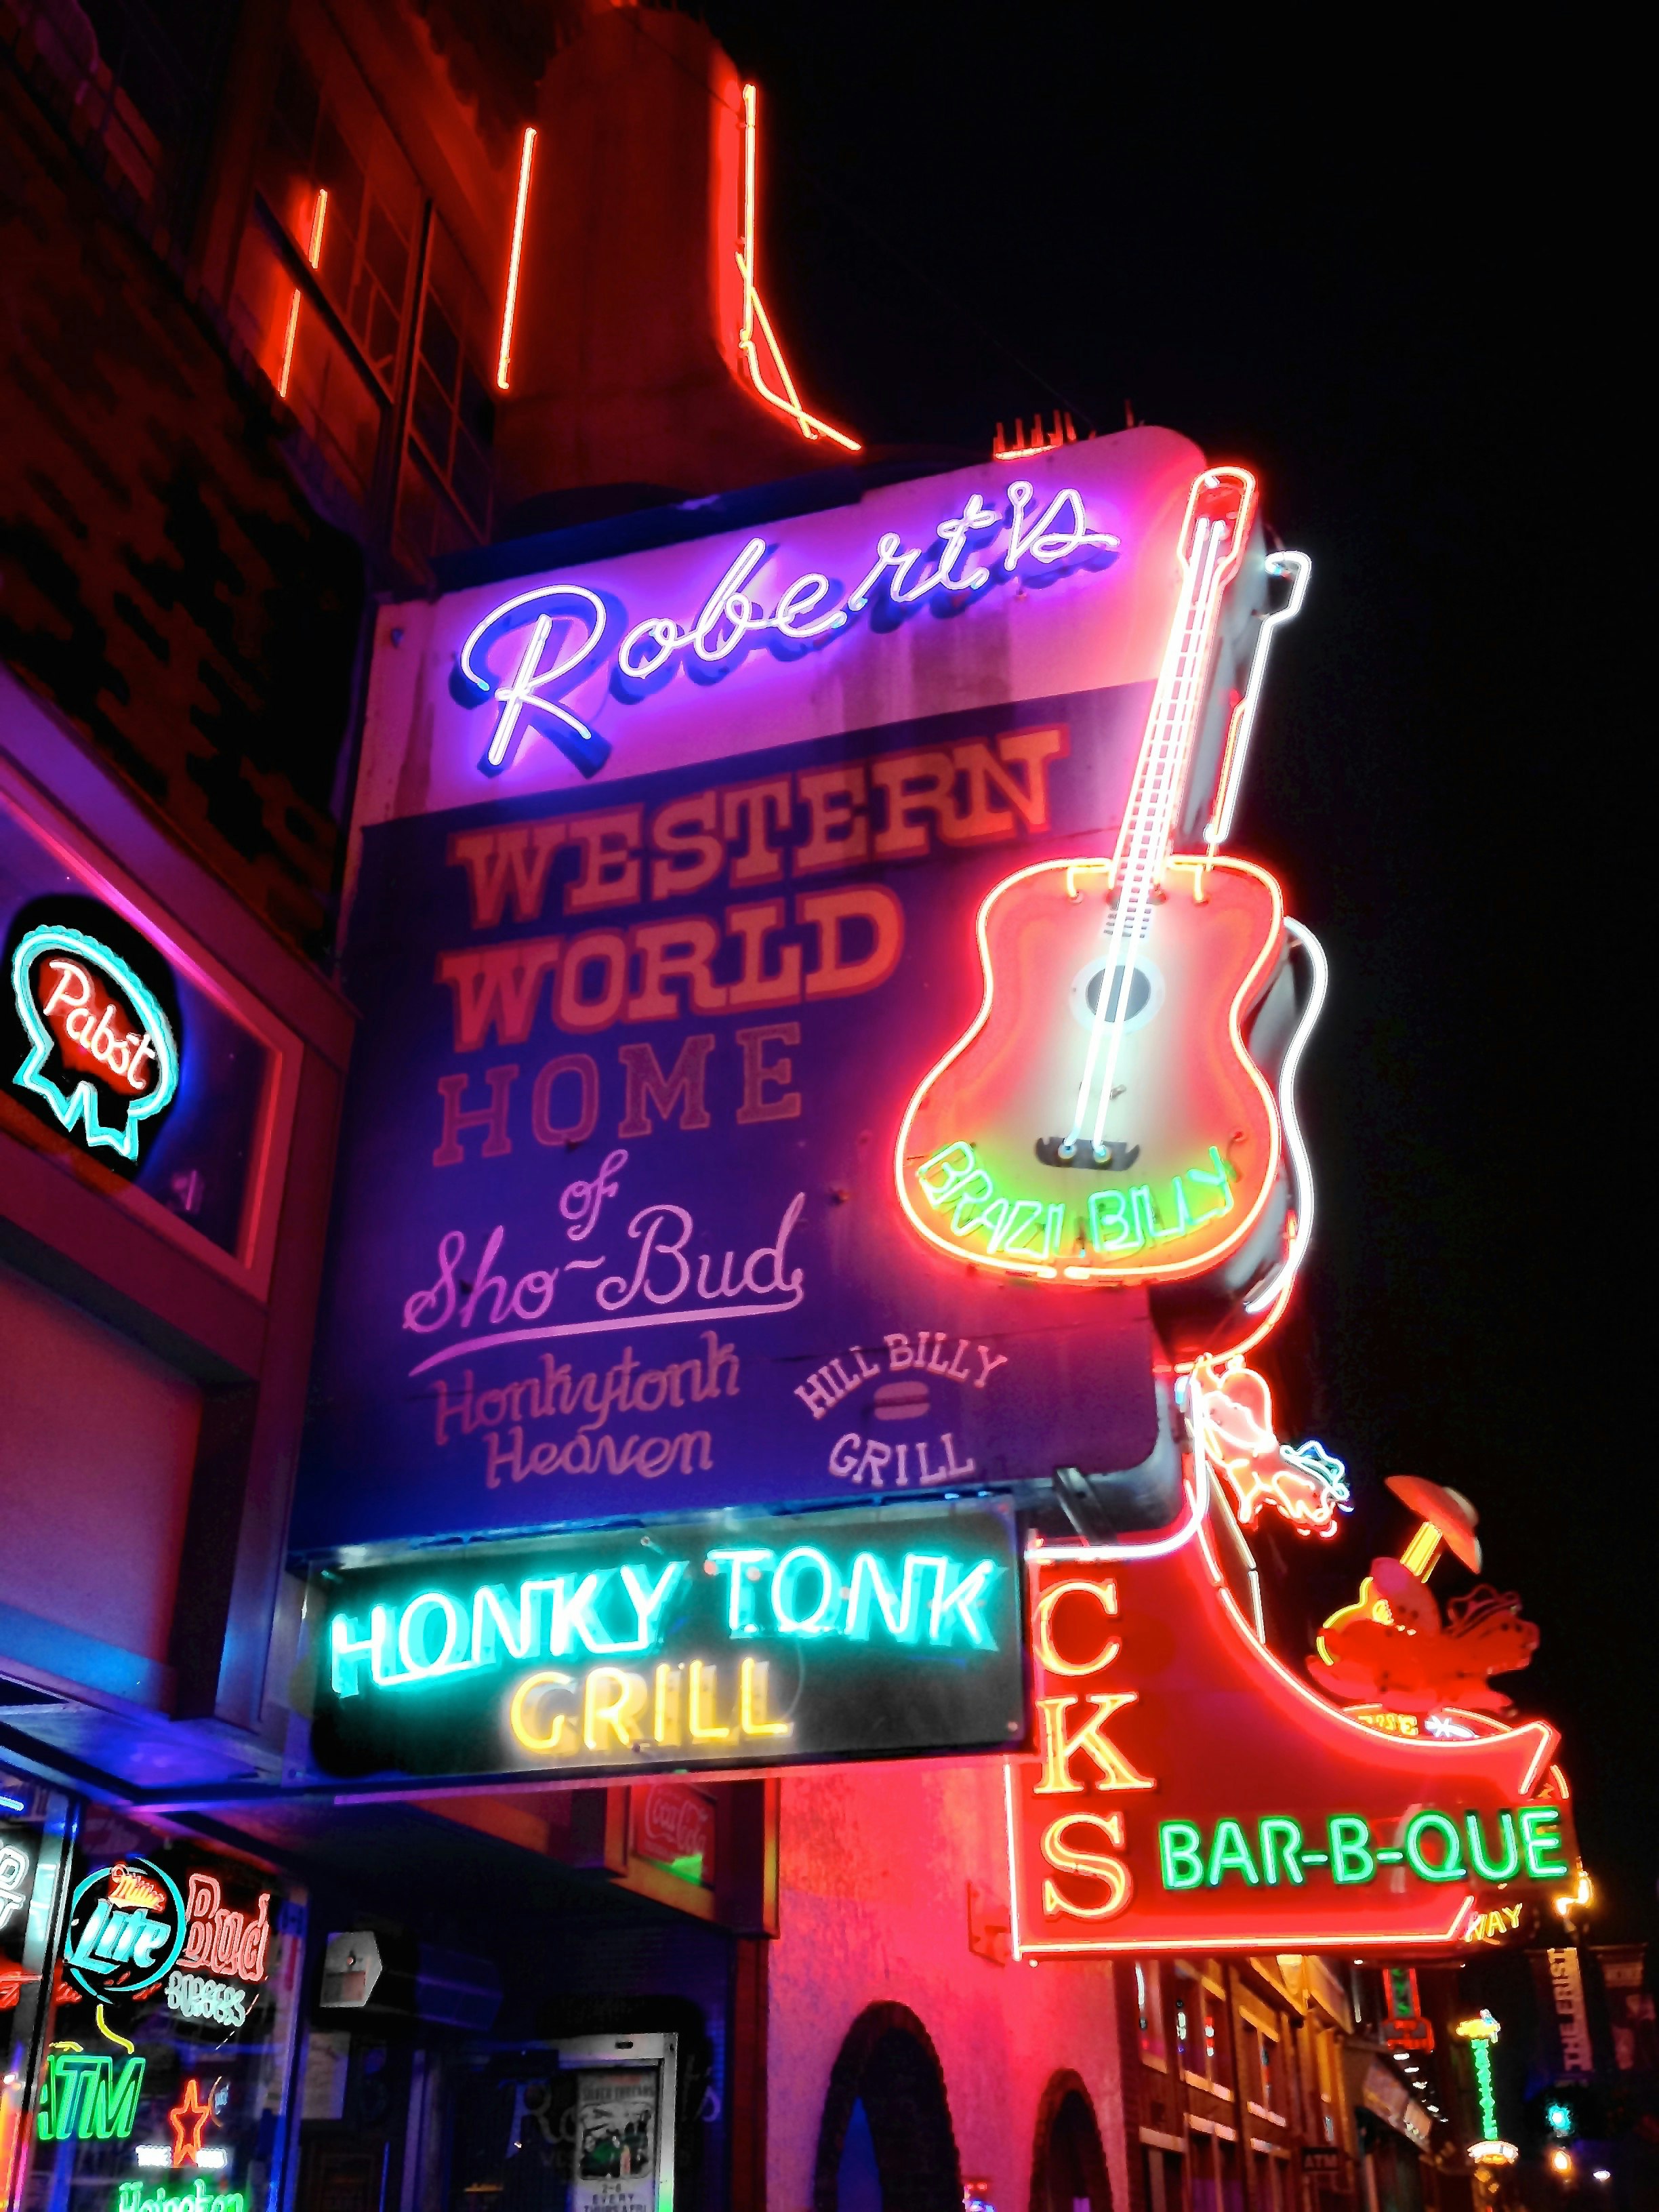 500px Photo ID: 130830891 - Perhaps the most famous of the honky tonk bars in downtown Nashville. Live bluegrass music every night, on Broadway.